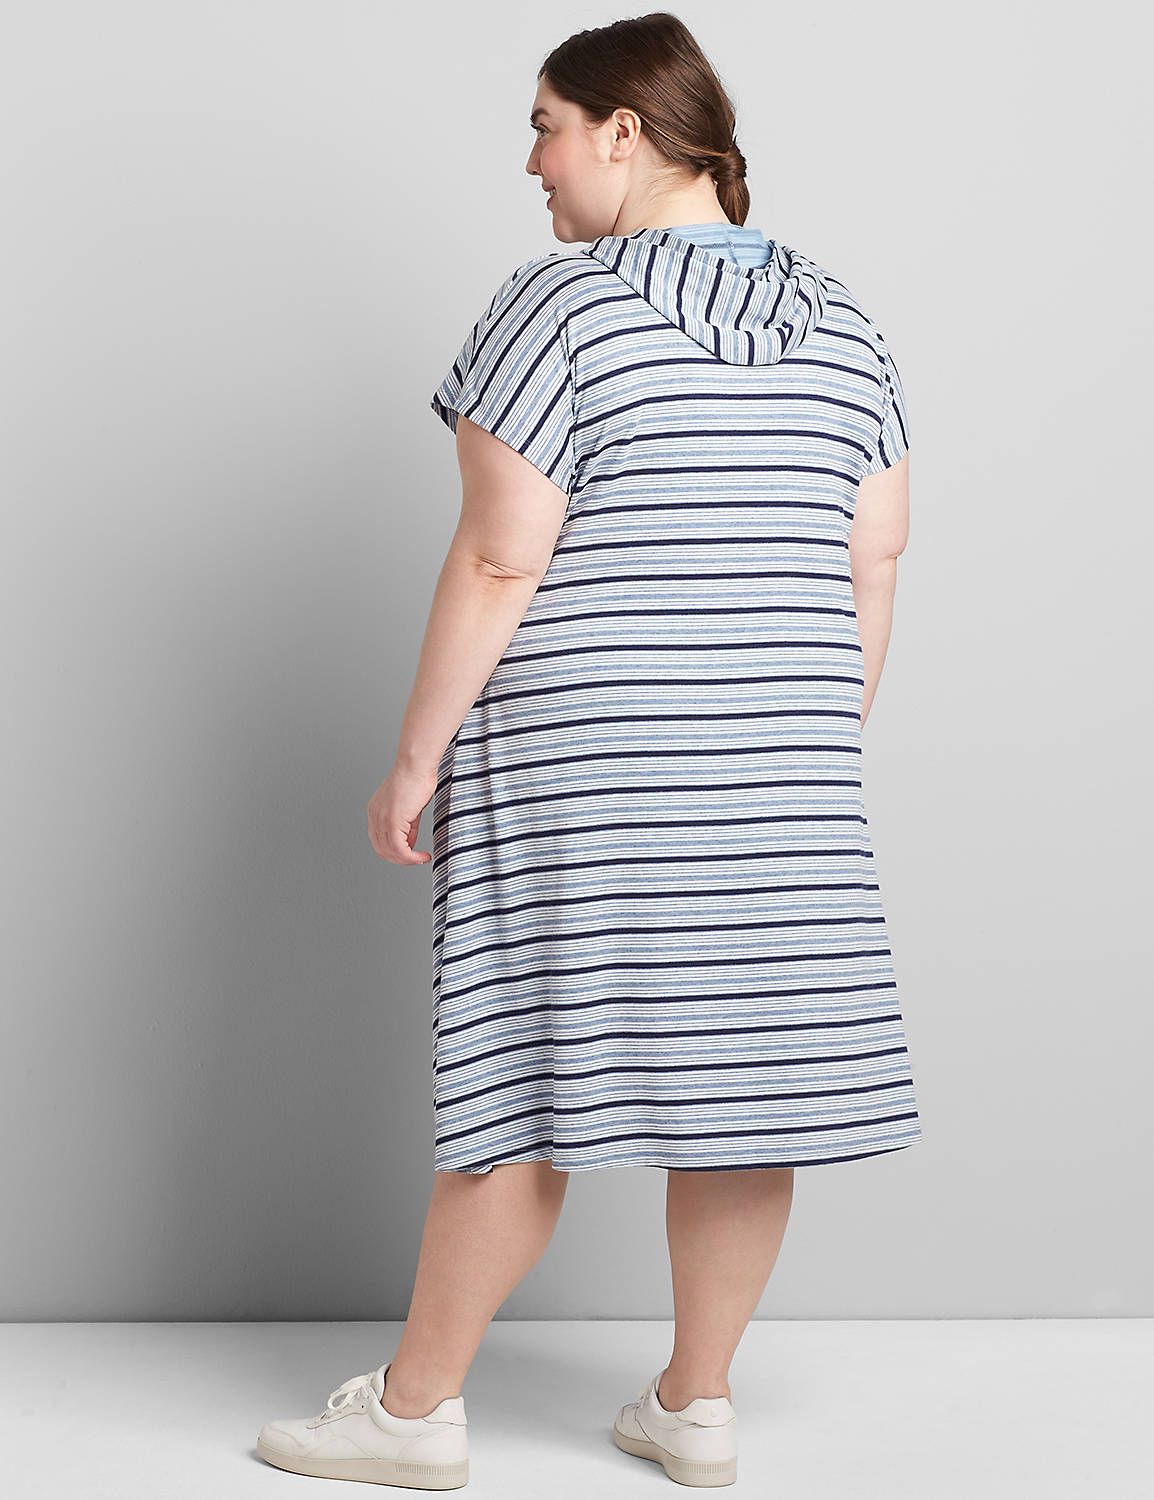 LIVI Striped Hooded Dress Product Image 2